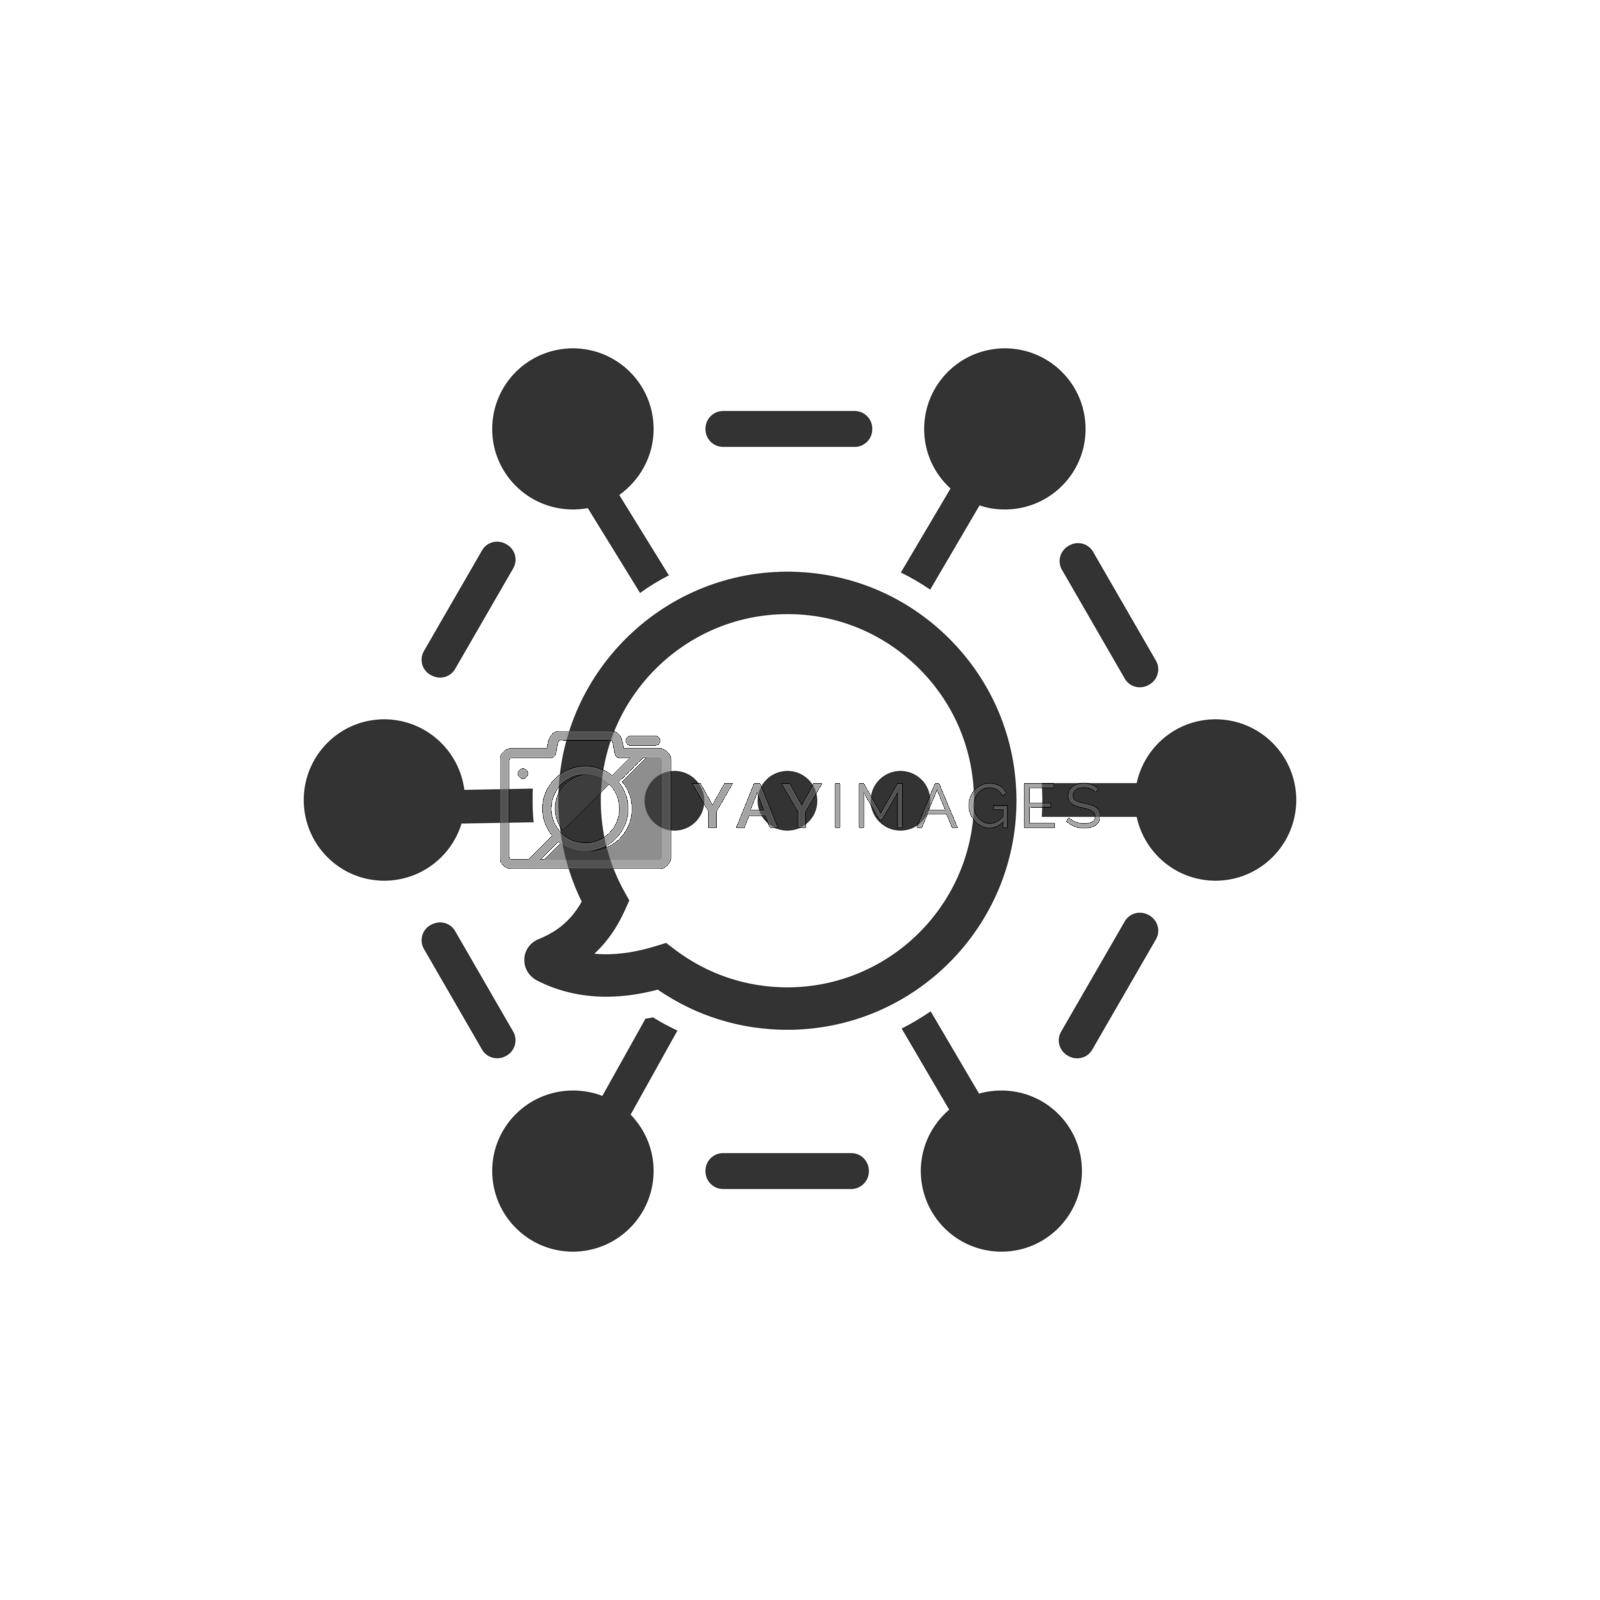 Royalty free image of Communication network icon  by delwar018